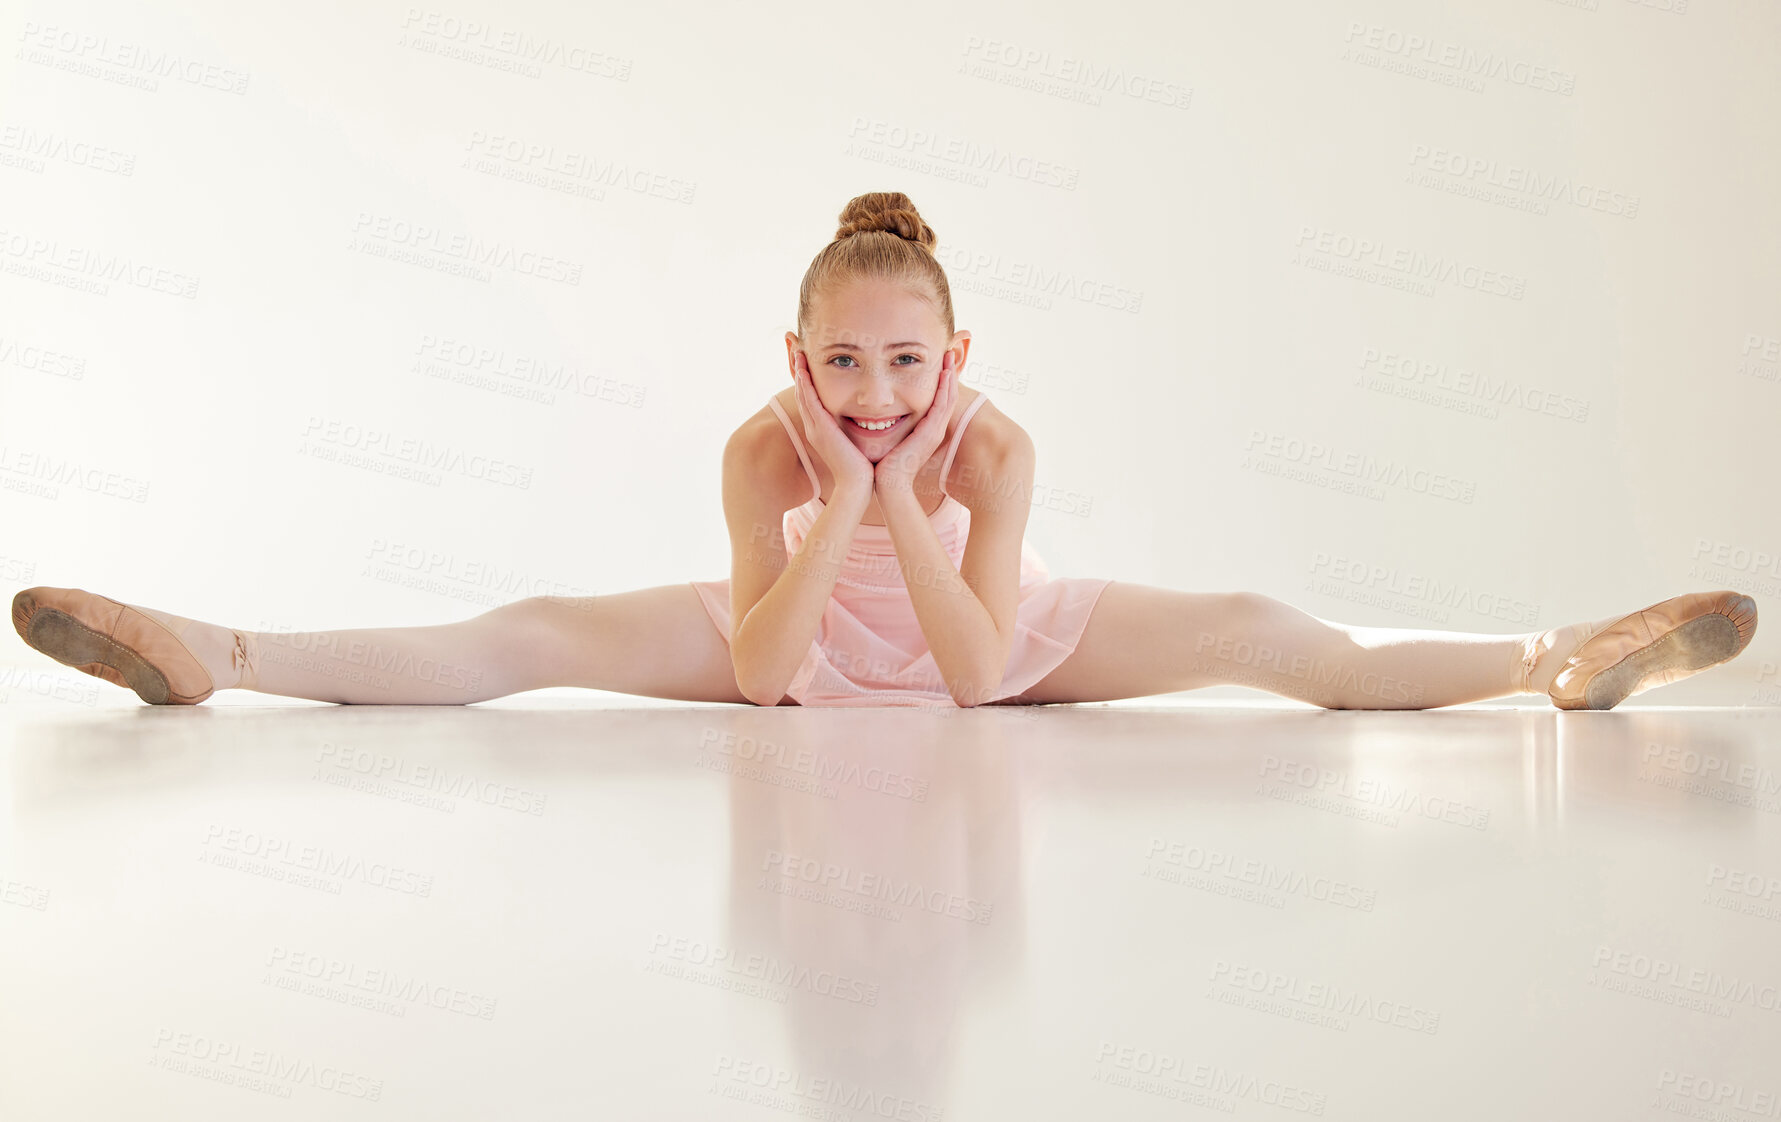 Buy stock photo Shot of a young ballerina stretching in a dance studio